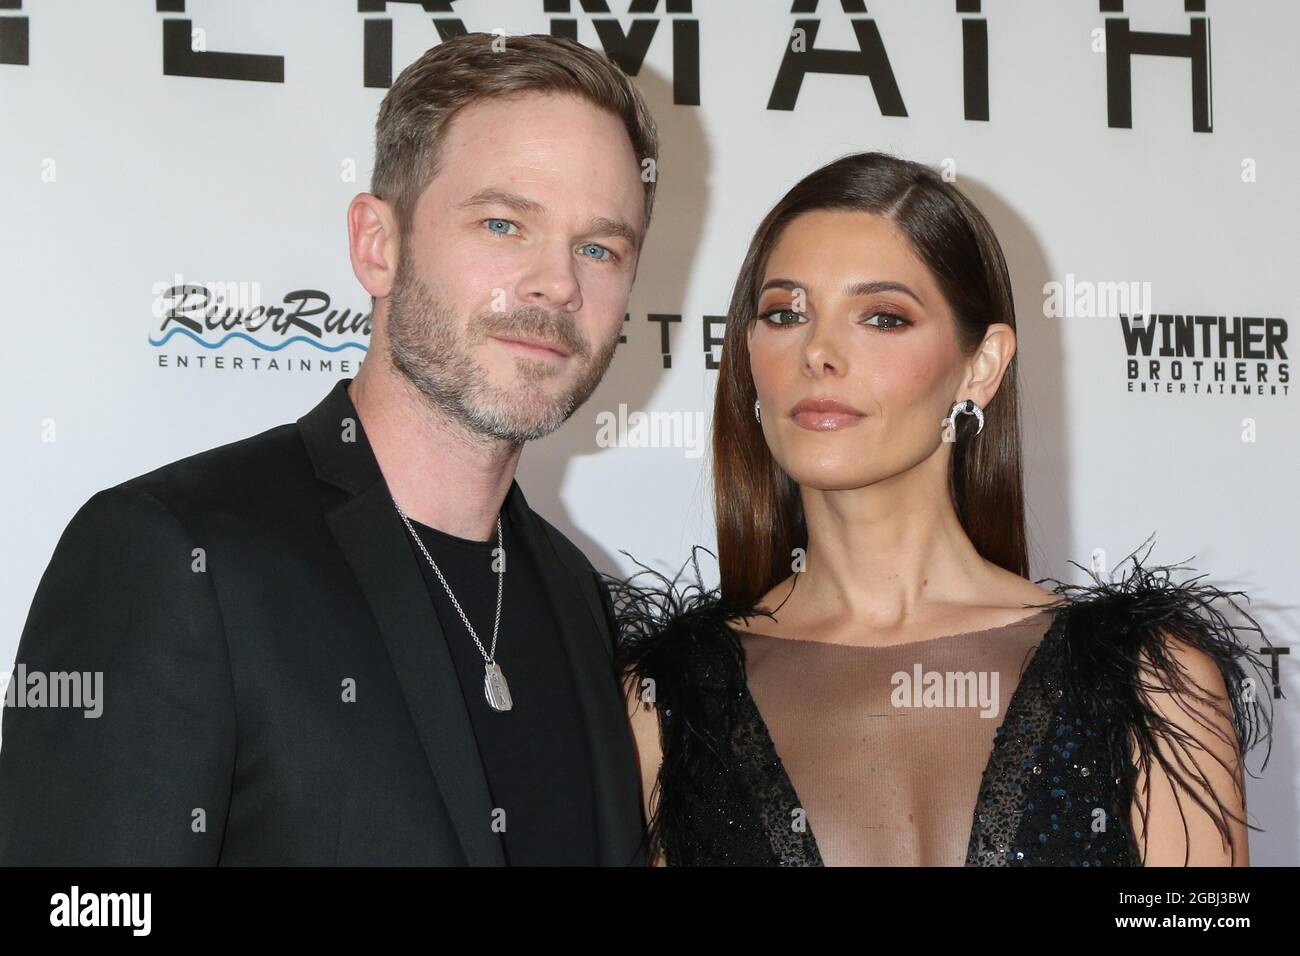 3 août 2021, Westwood, CA, USA: LOS ANGELES - 3 AOÛT: Shawn Ashmore, Ashley Greene at the Aftermath Premiere at the Landmark Theatre on 3 août 2021 in Westwood, CA (Credit image: © Kay Blake/ZUMA Press Wire) Banque D'Images